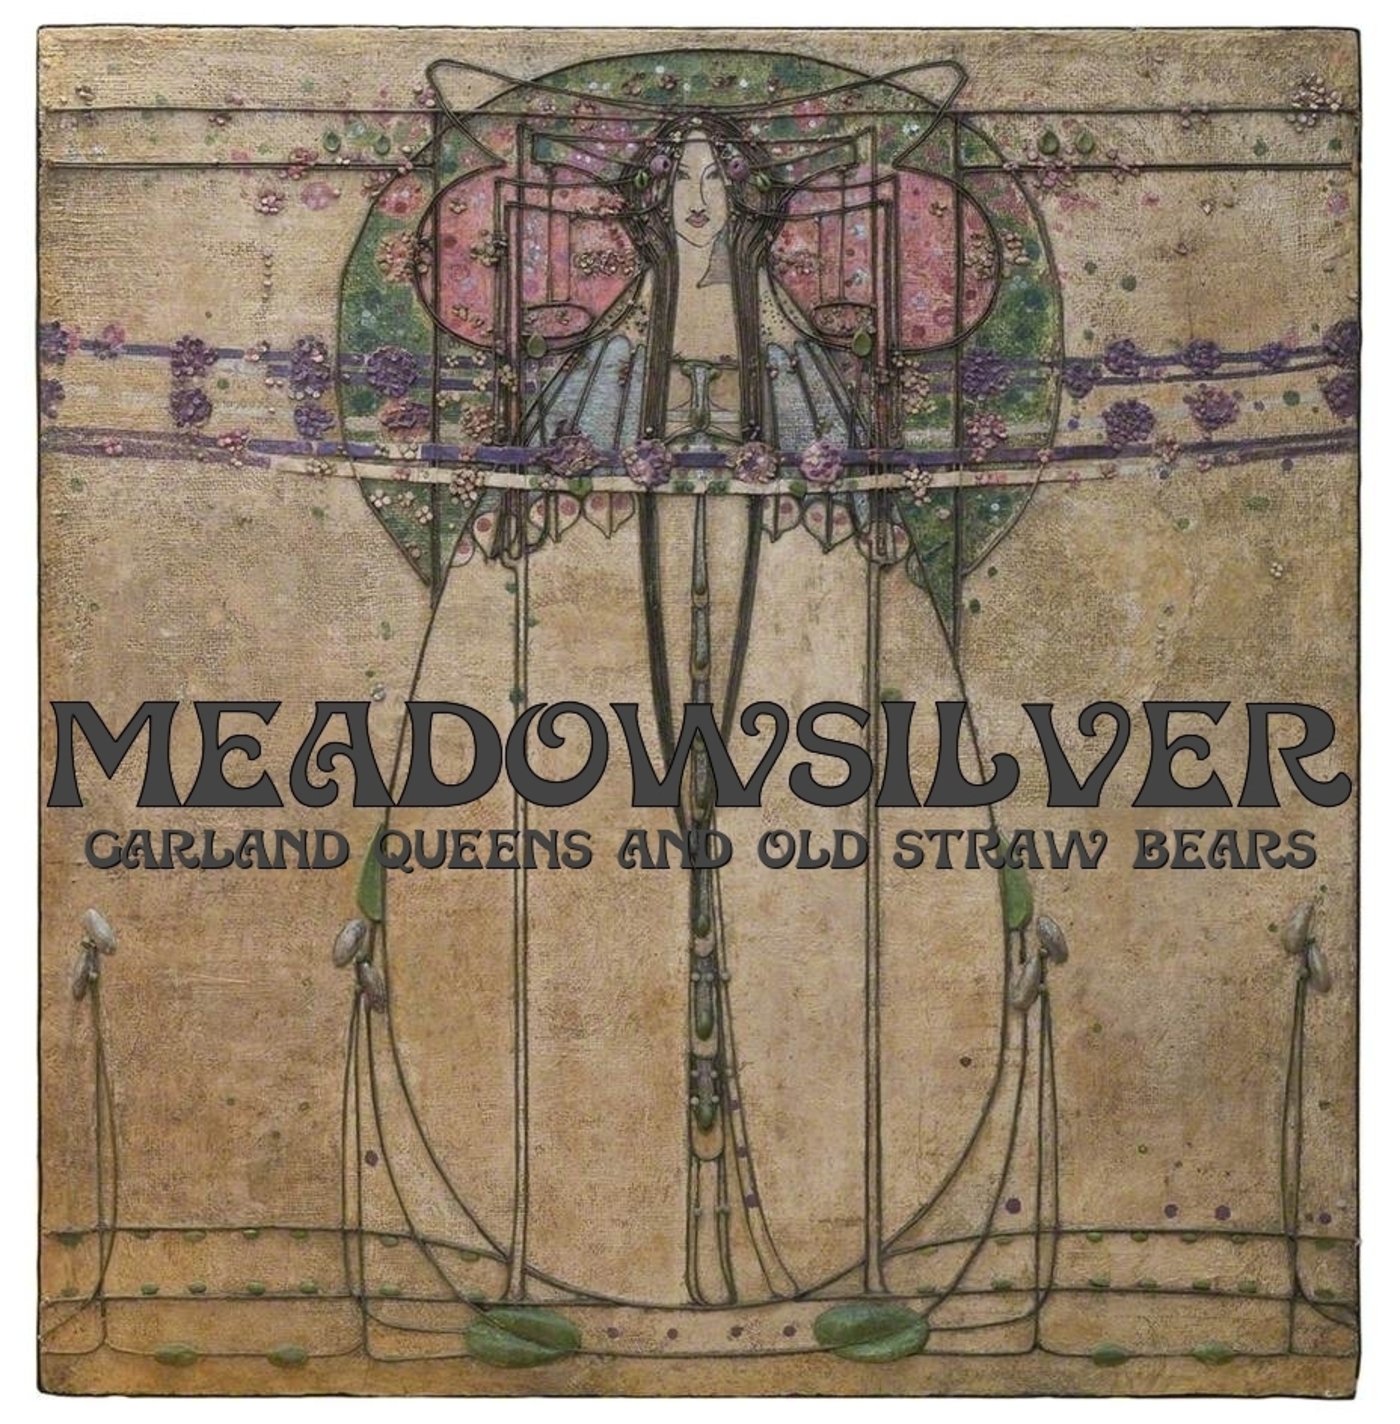 Garland Queens and Old Straw Bears by Meadowsilver